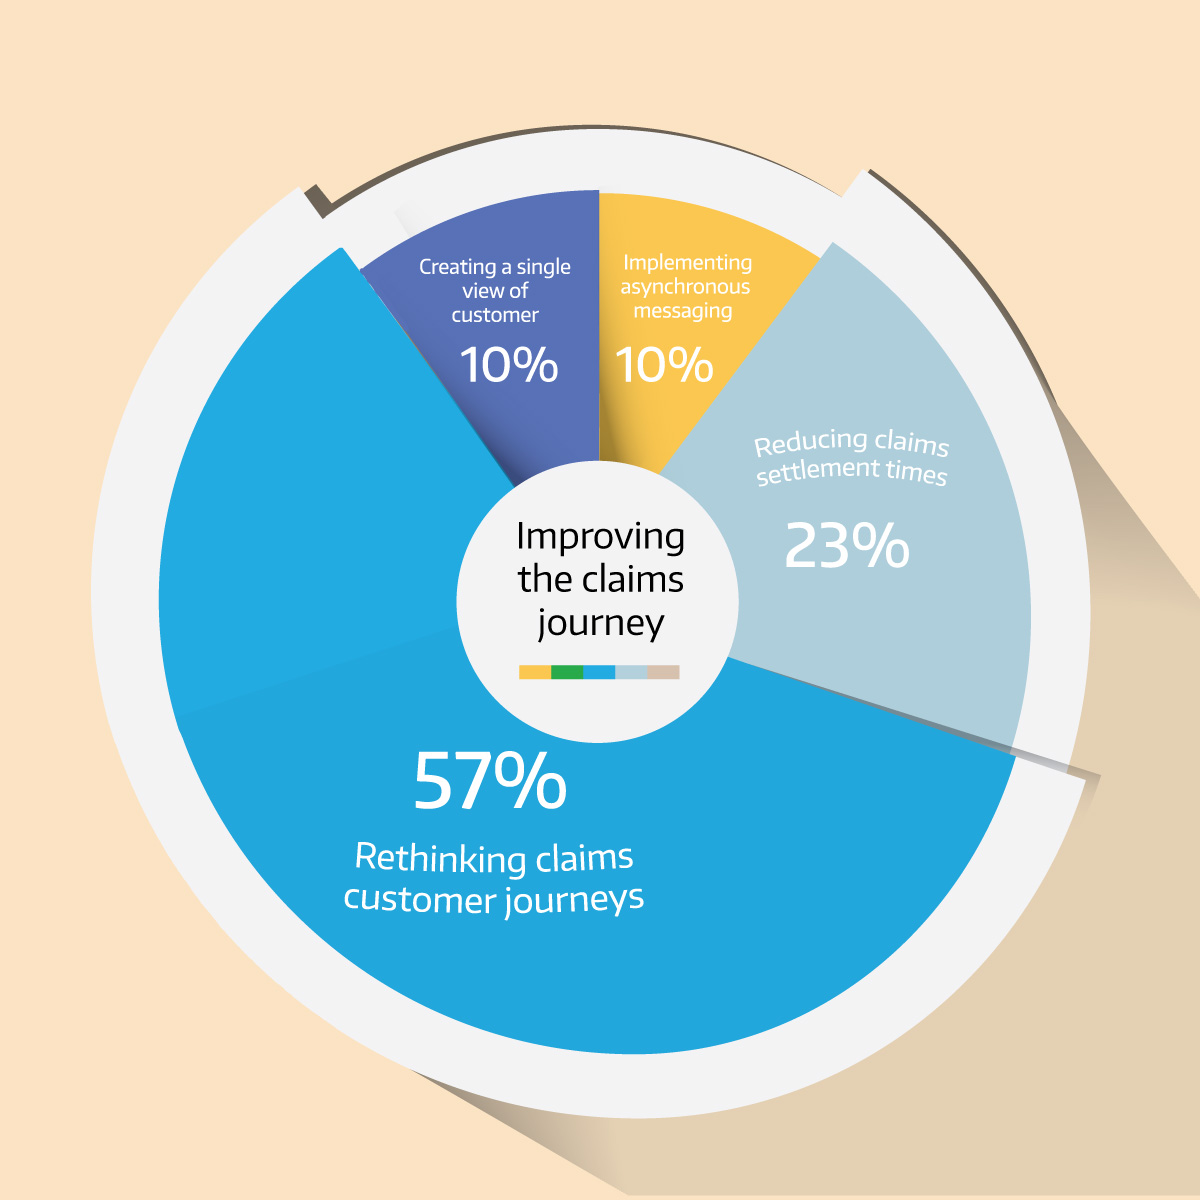 This graph illustrates 4 areas of improvement in customer claims journeys in insurance